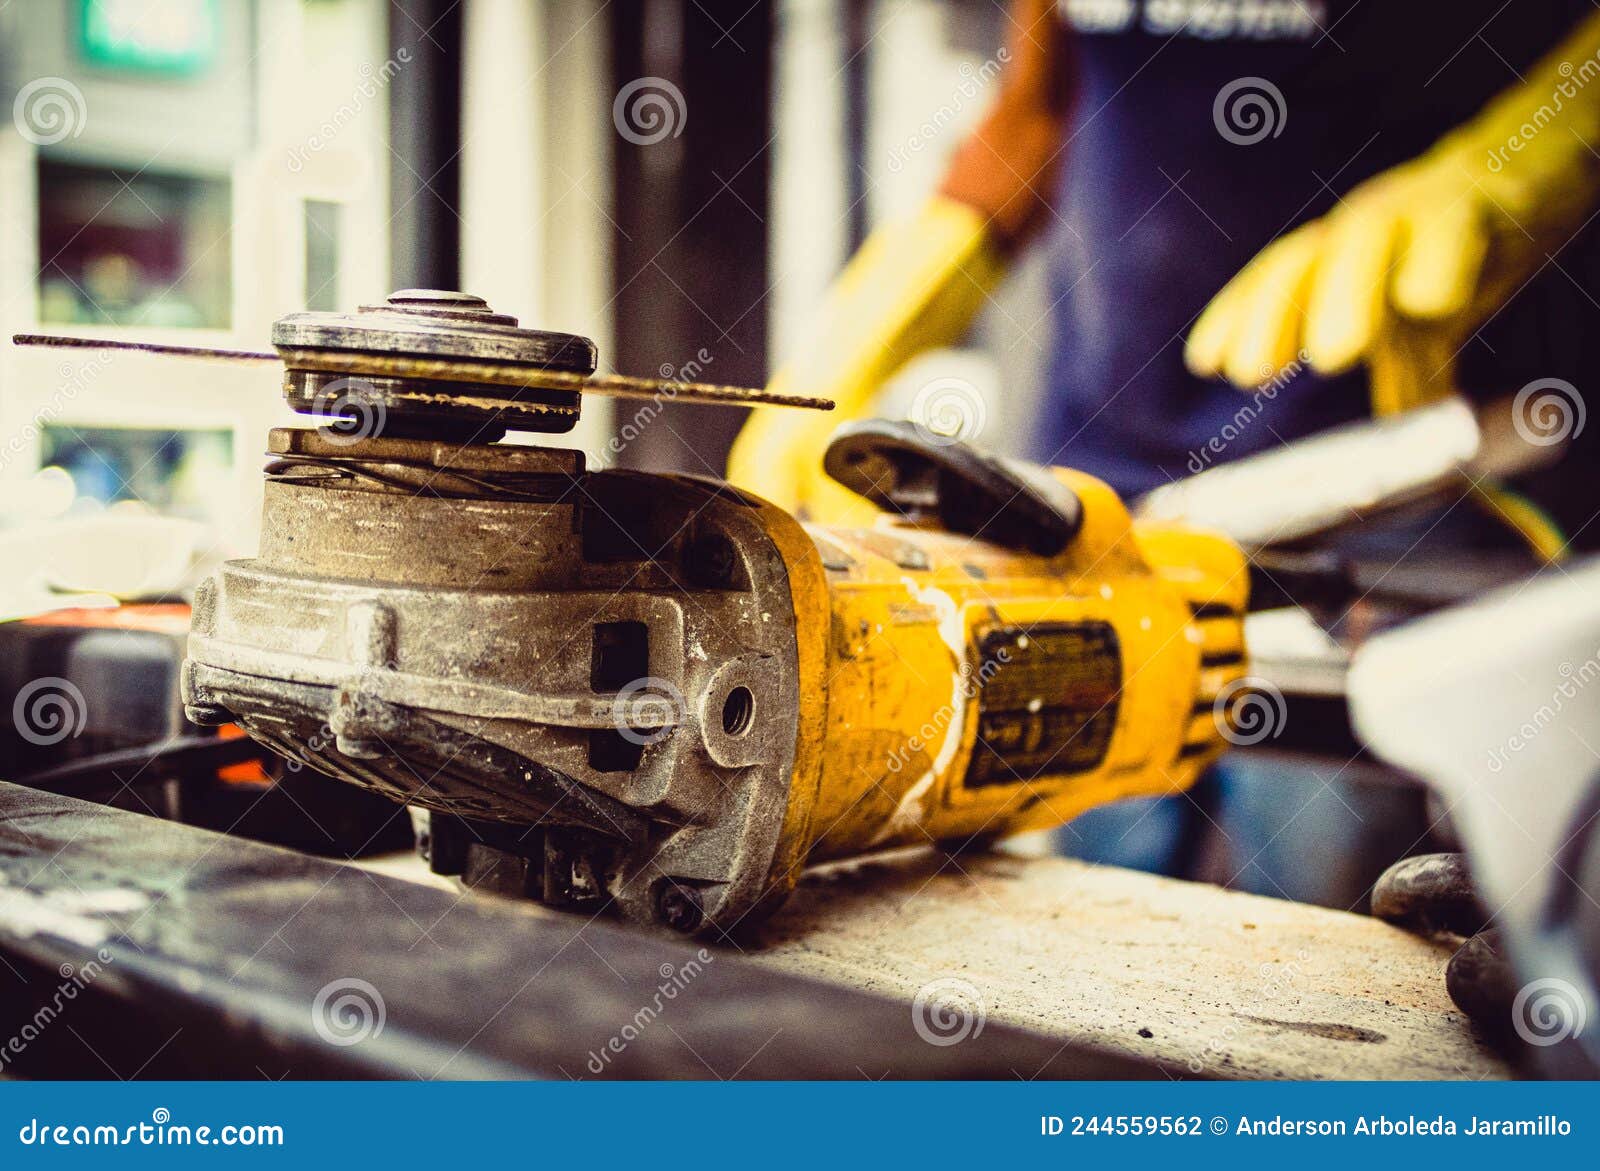 construction tool with man behind welding